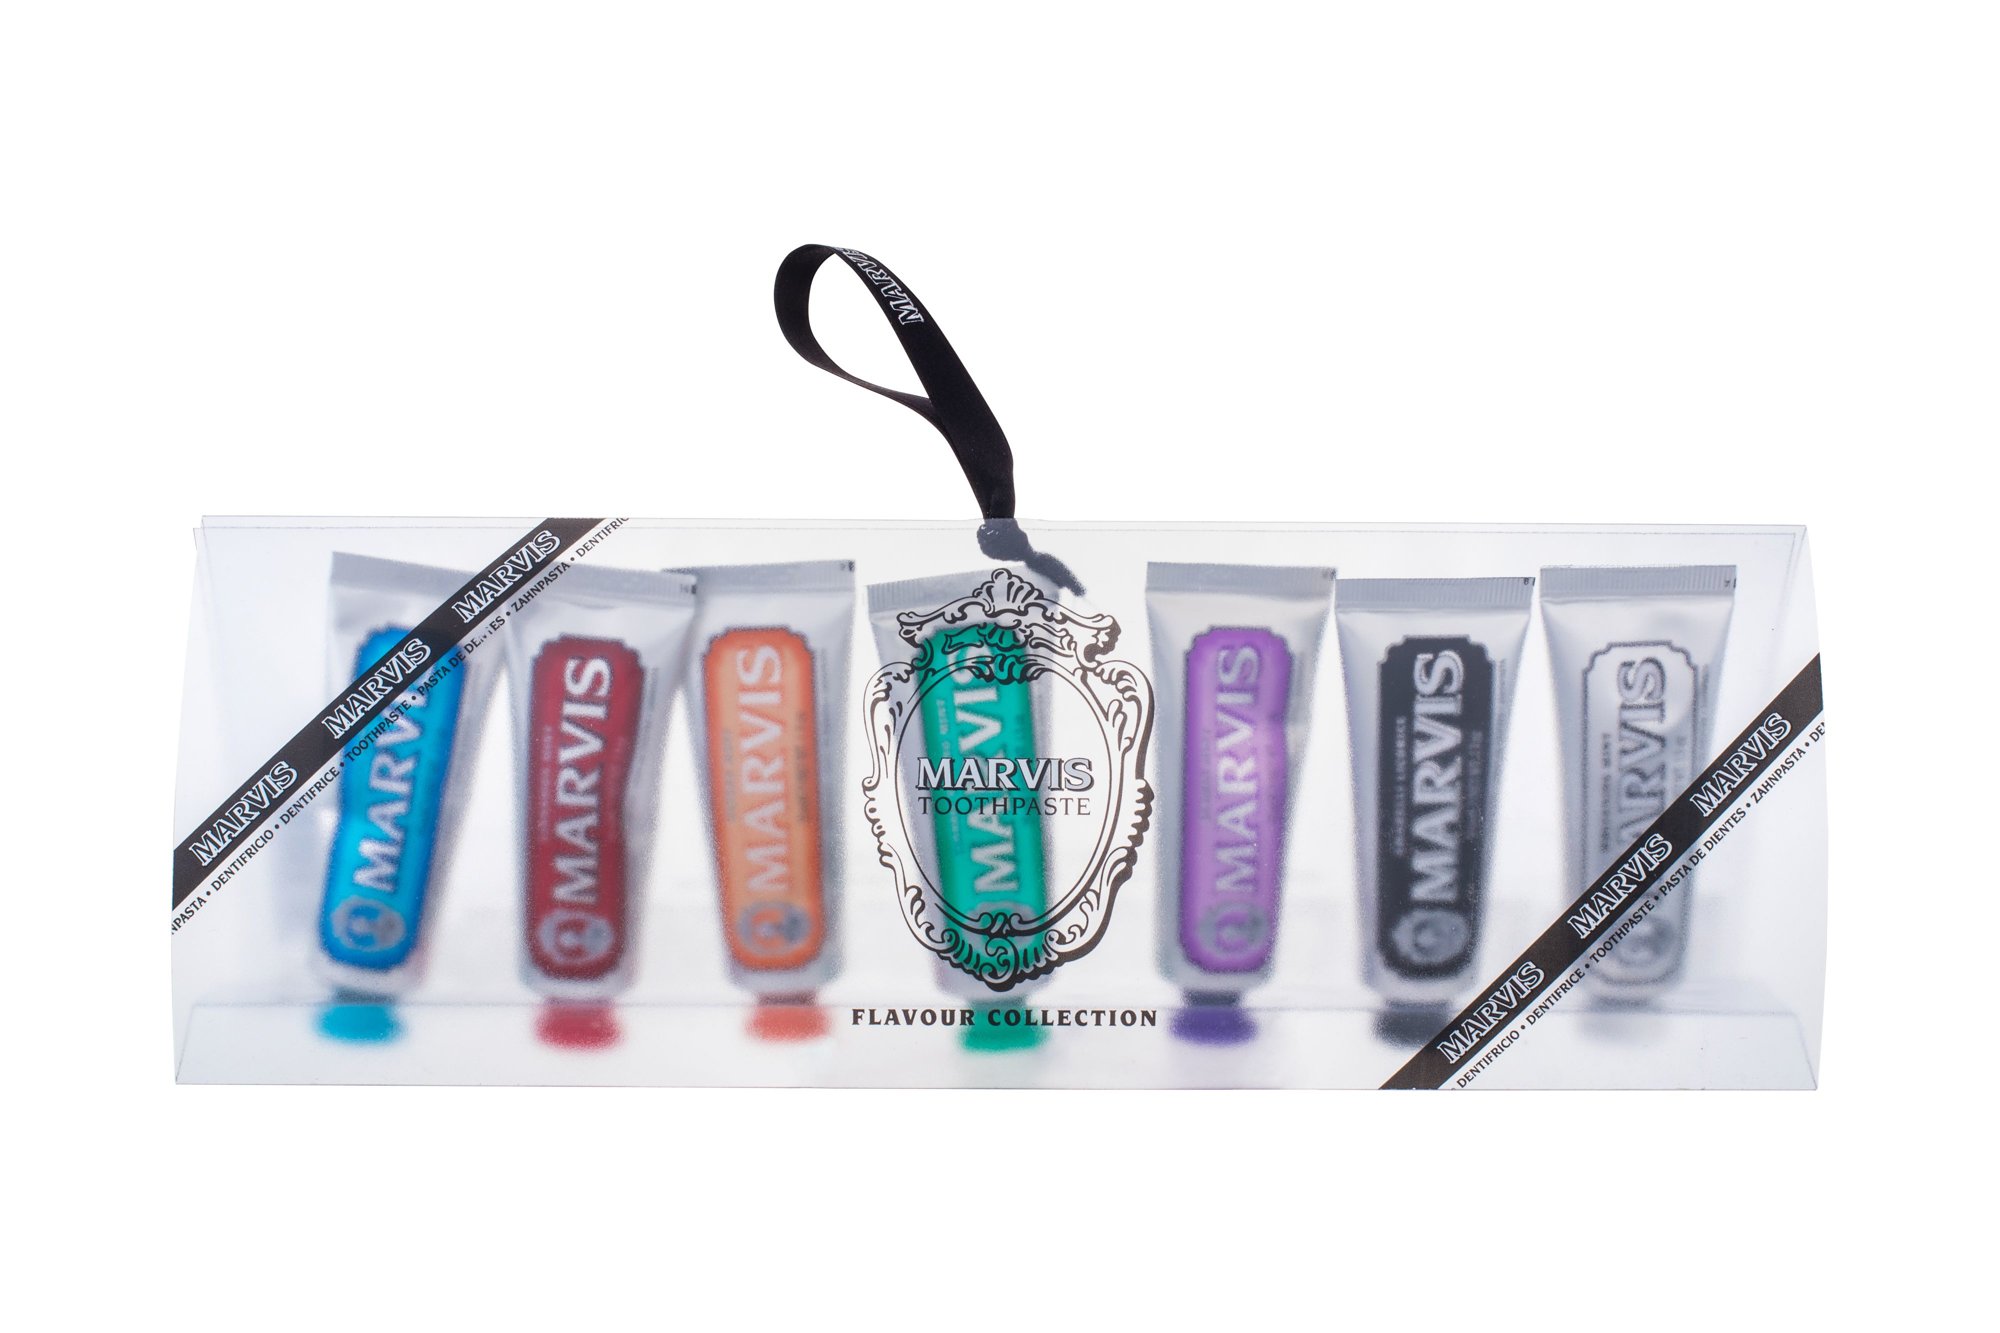 Marvis Toothpaste Flavour Collection Kit